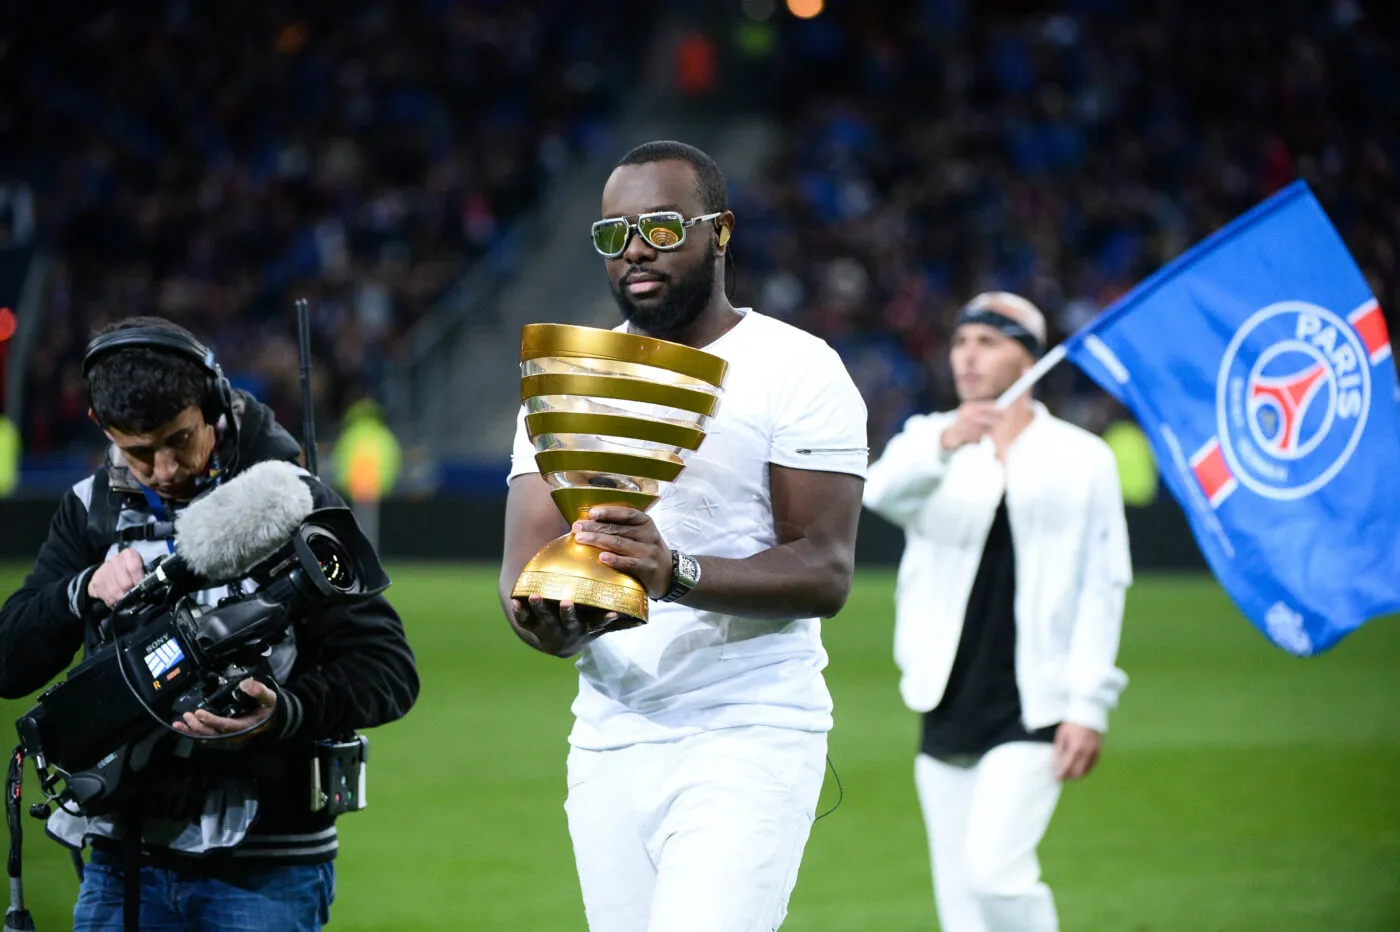 French singer Maitre Gims during the League Cup Final match between Lille and Paris Saint-Germain at Stade de France on April 23, 2016 in Paris, France. (Photo by Nolwenn Le Gouic/Icon Sport)